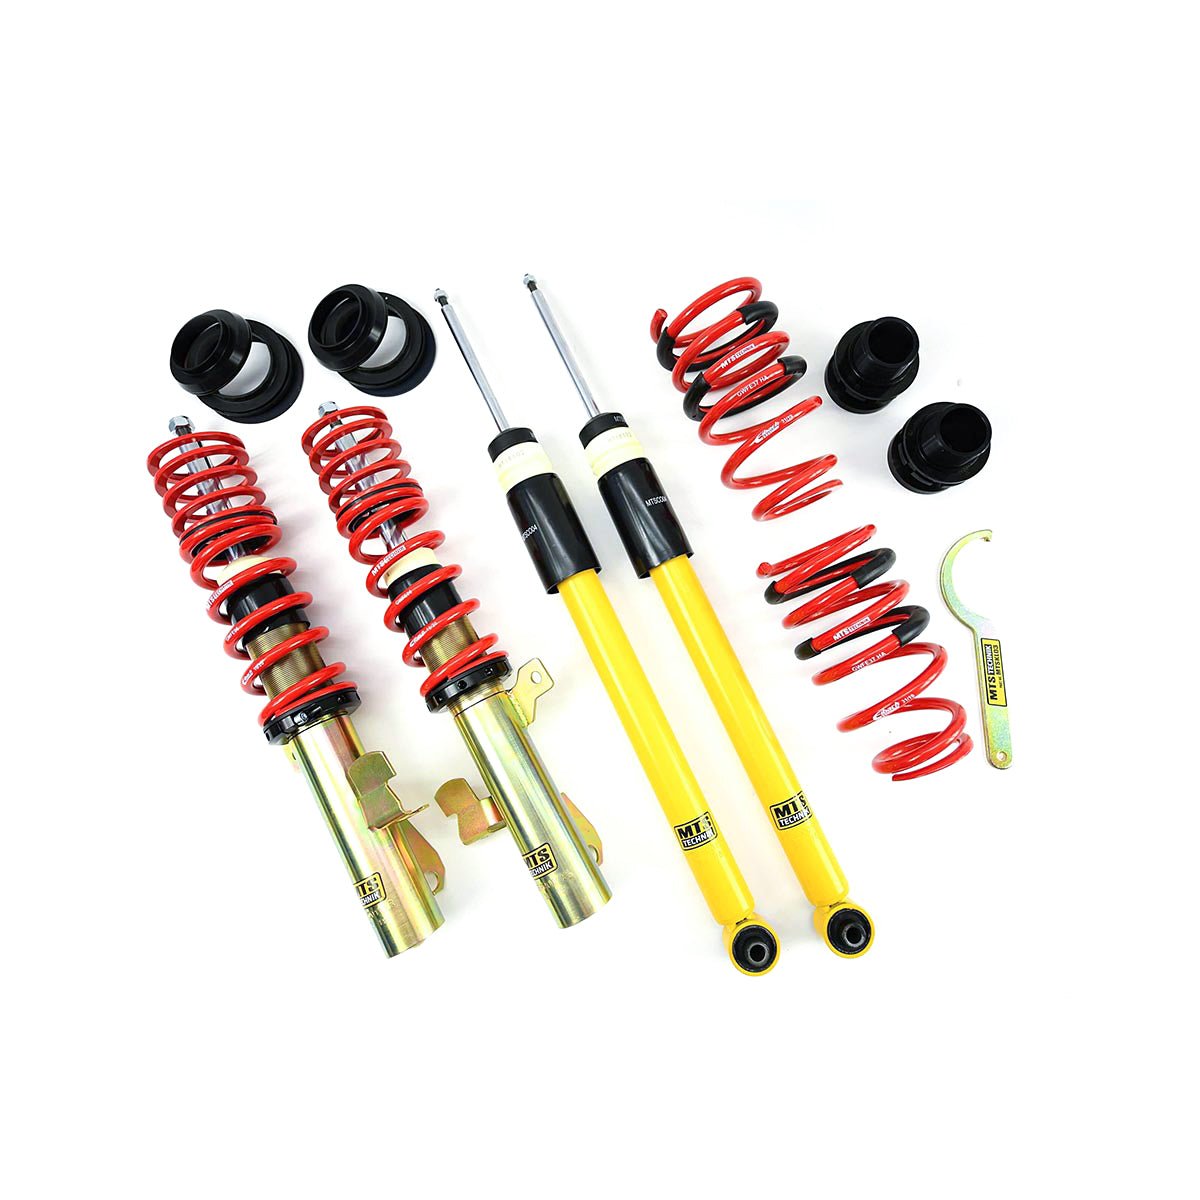 MTS TECHNIK coilover kit Street Ford Focus C-Max - PARTS33 GmbH